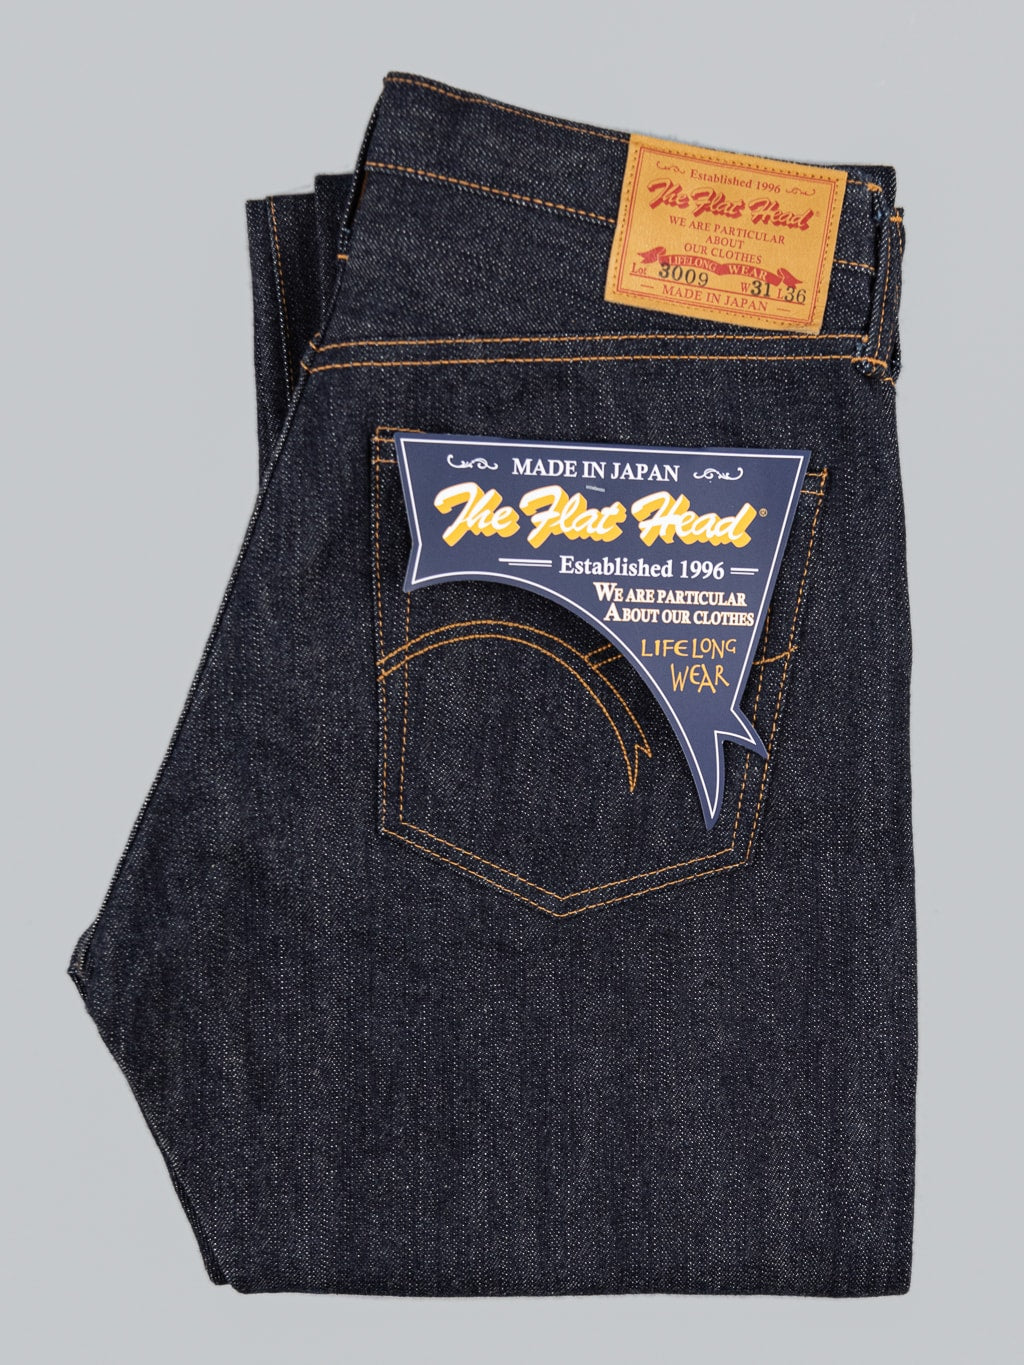 The Flat Head 3009 14.5oz straight tapered Jeans japanese made